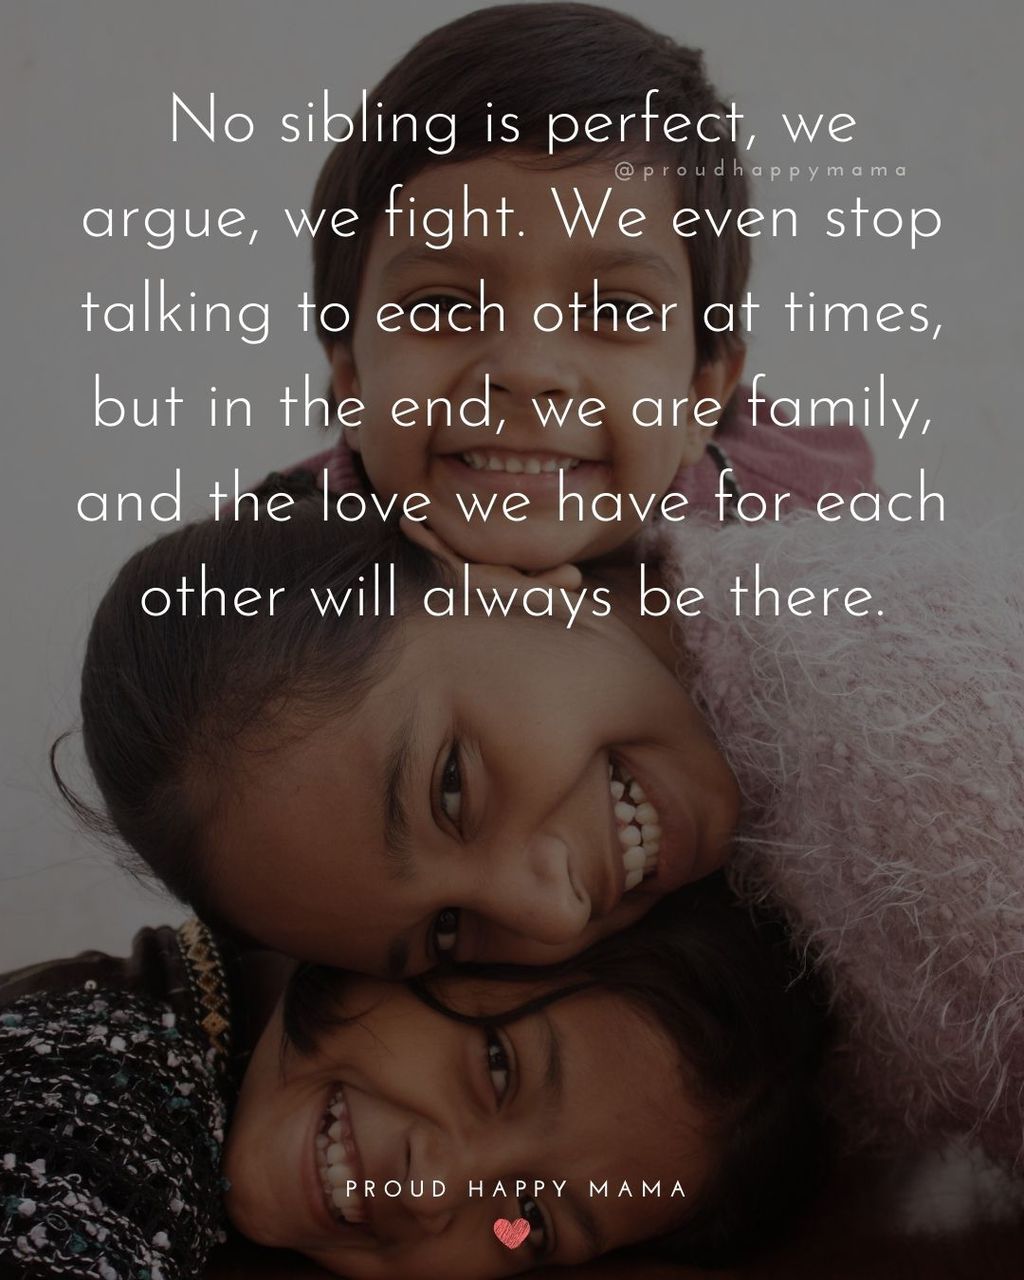 Sister Quotes - No sibling is perfect, we argue, we fight. We even stop talking to each other at times, but in the end, we are family, and the love we have for each other always be there.